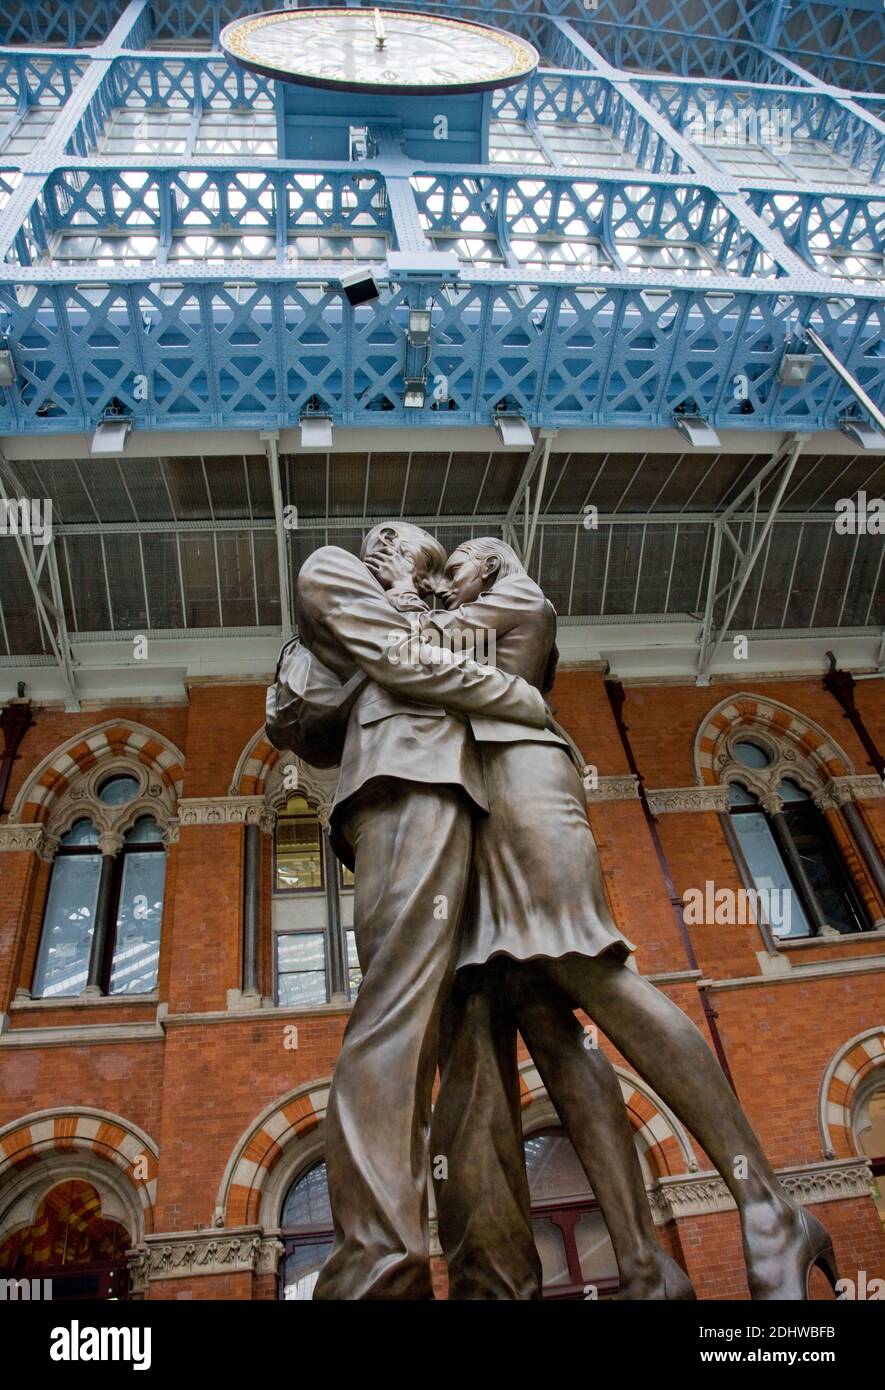 Paul Day's sculpture of embracing couple 'The Meeting Place' at St Pancras station London underneath the clock where generations of couples have parted Stock Photo